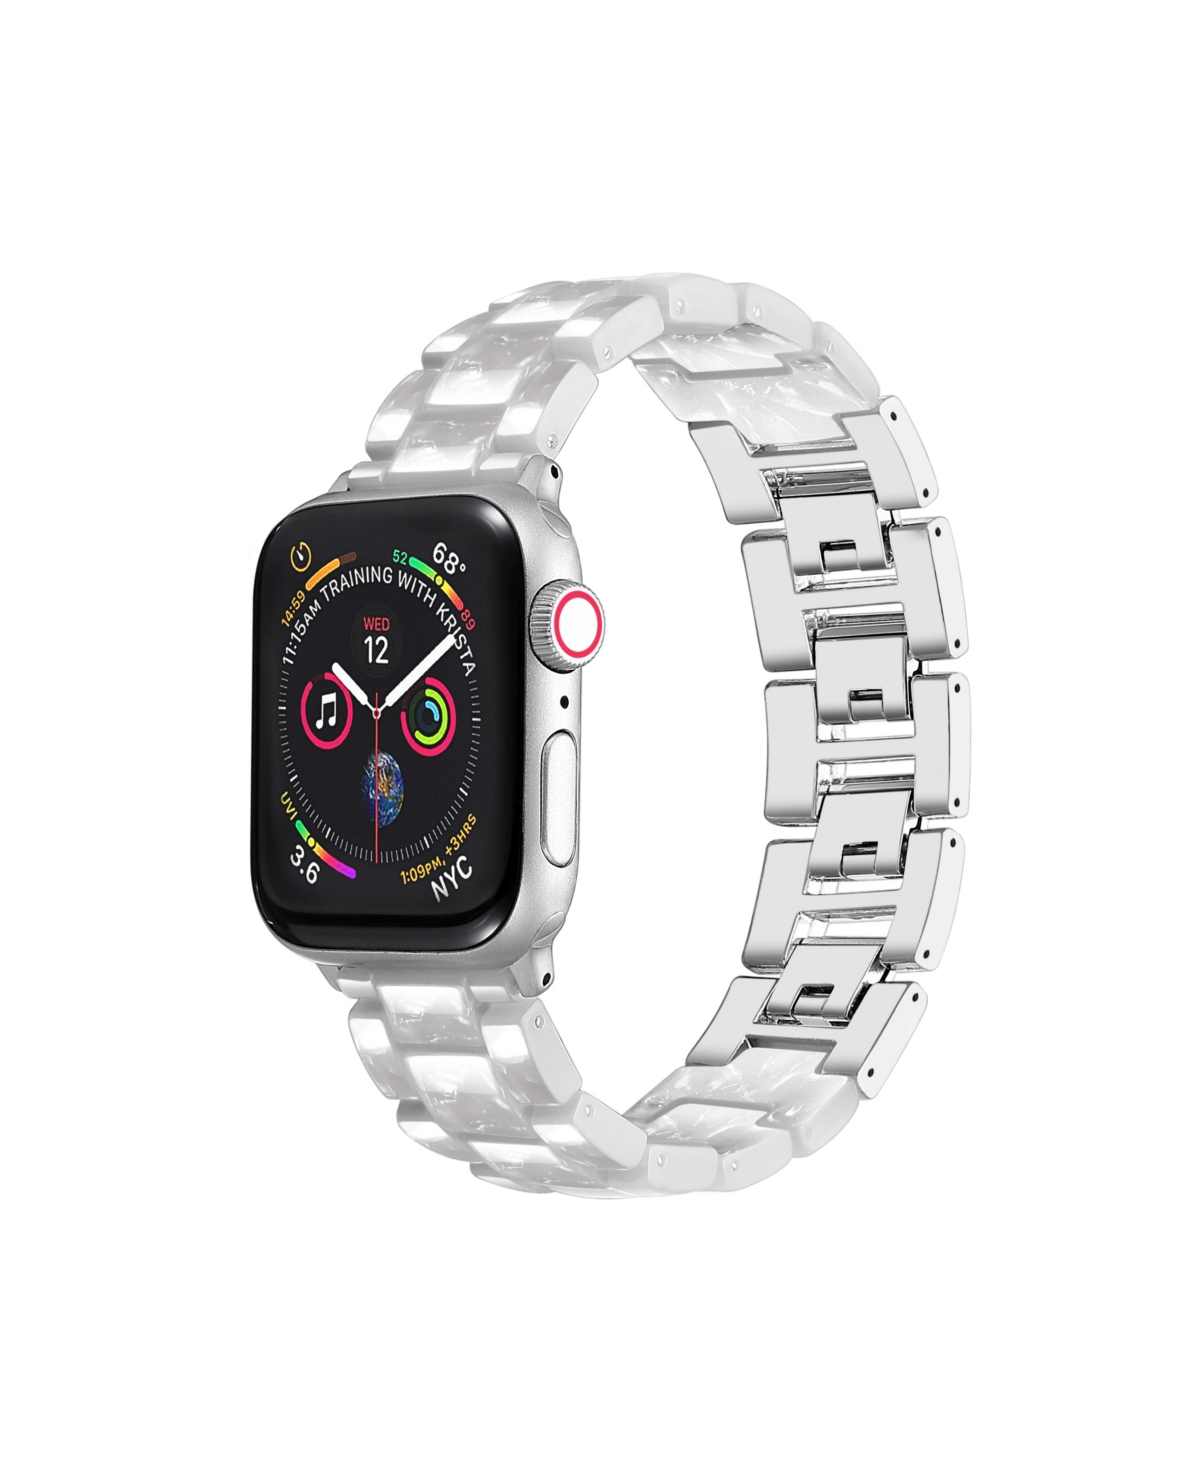 Men's and Women's Resin Band for Apple Watch with Removable Clasp 38mm - Multi